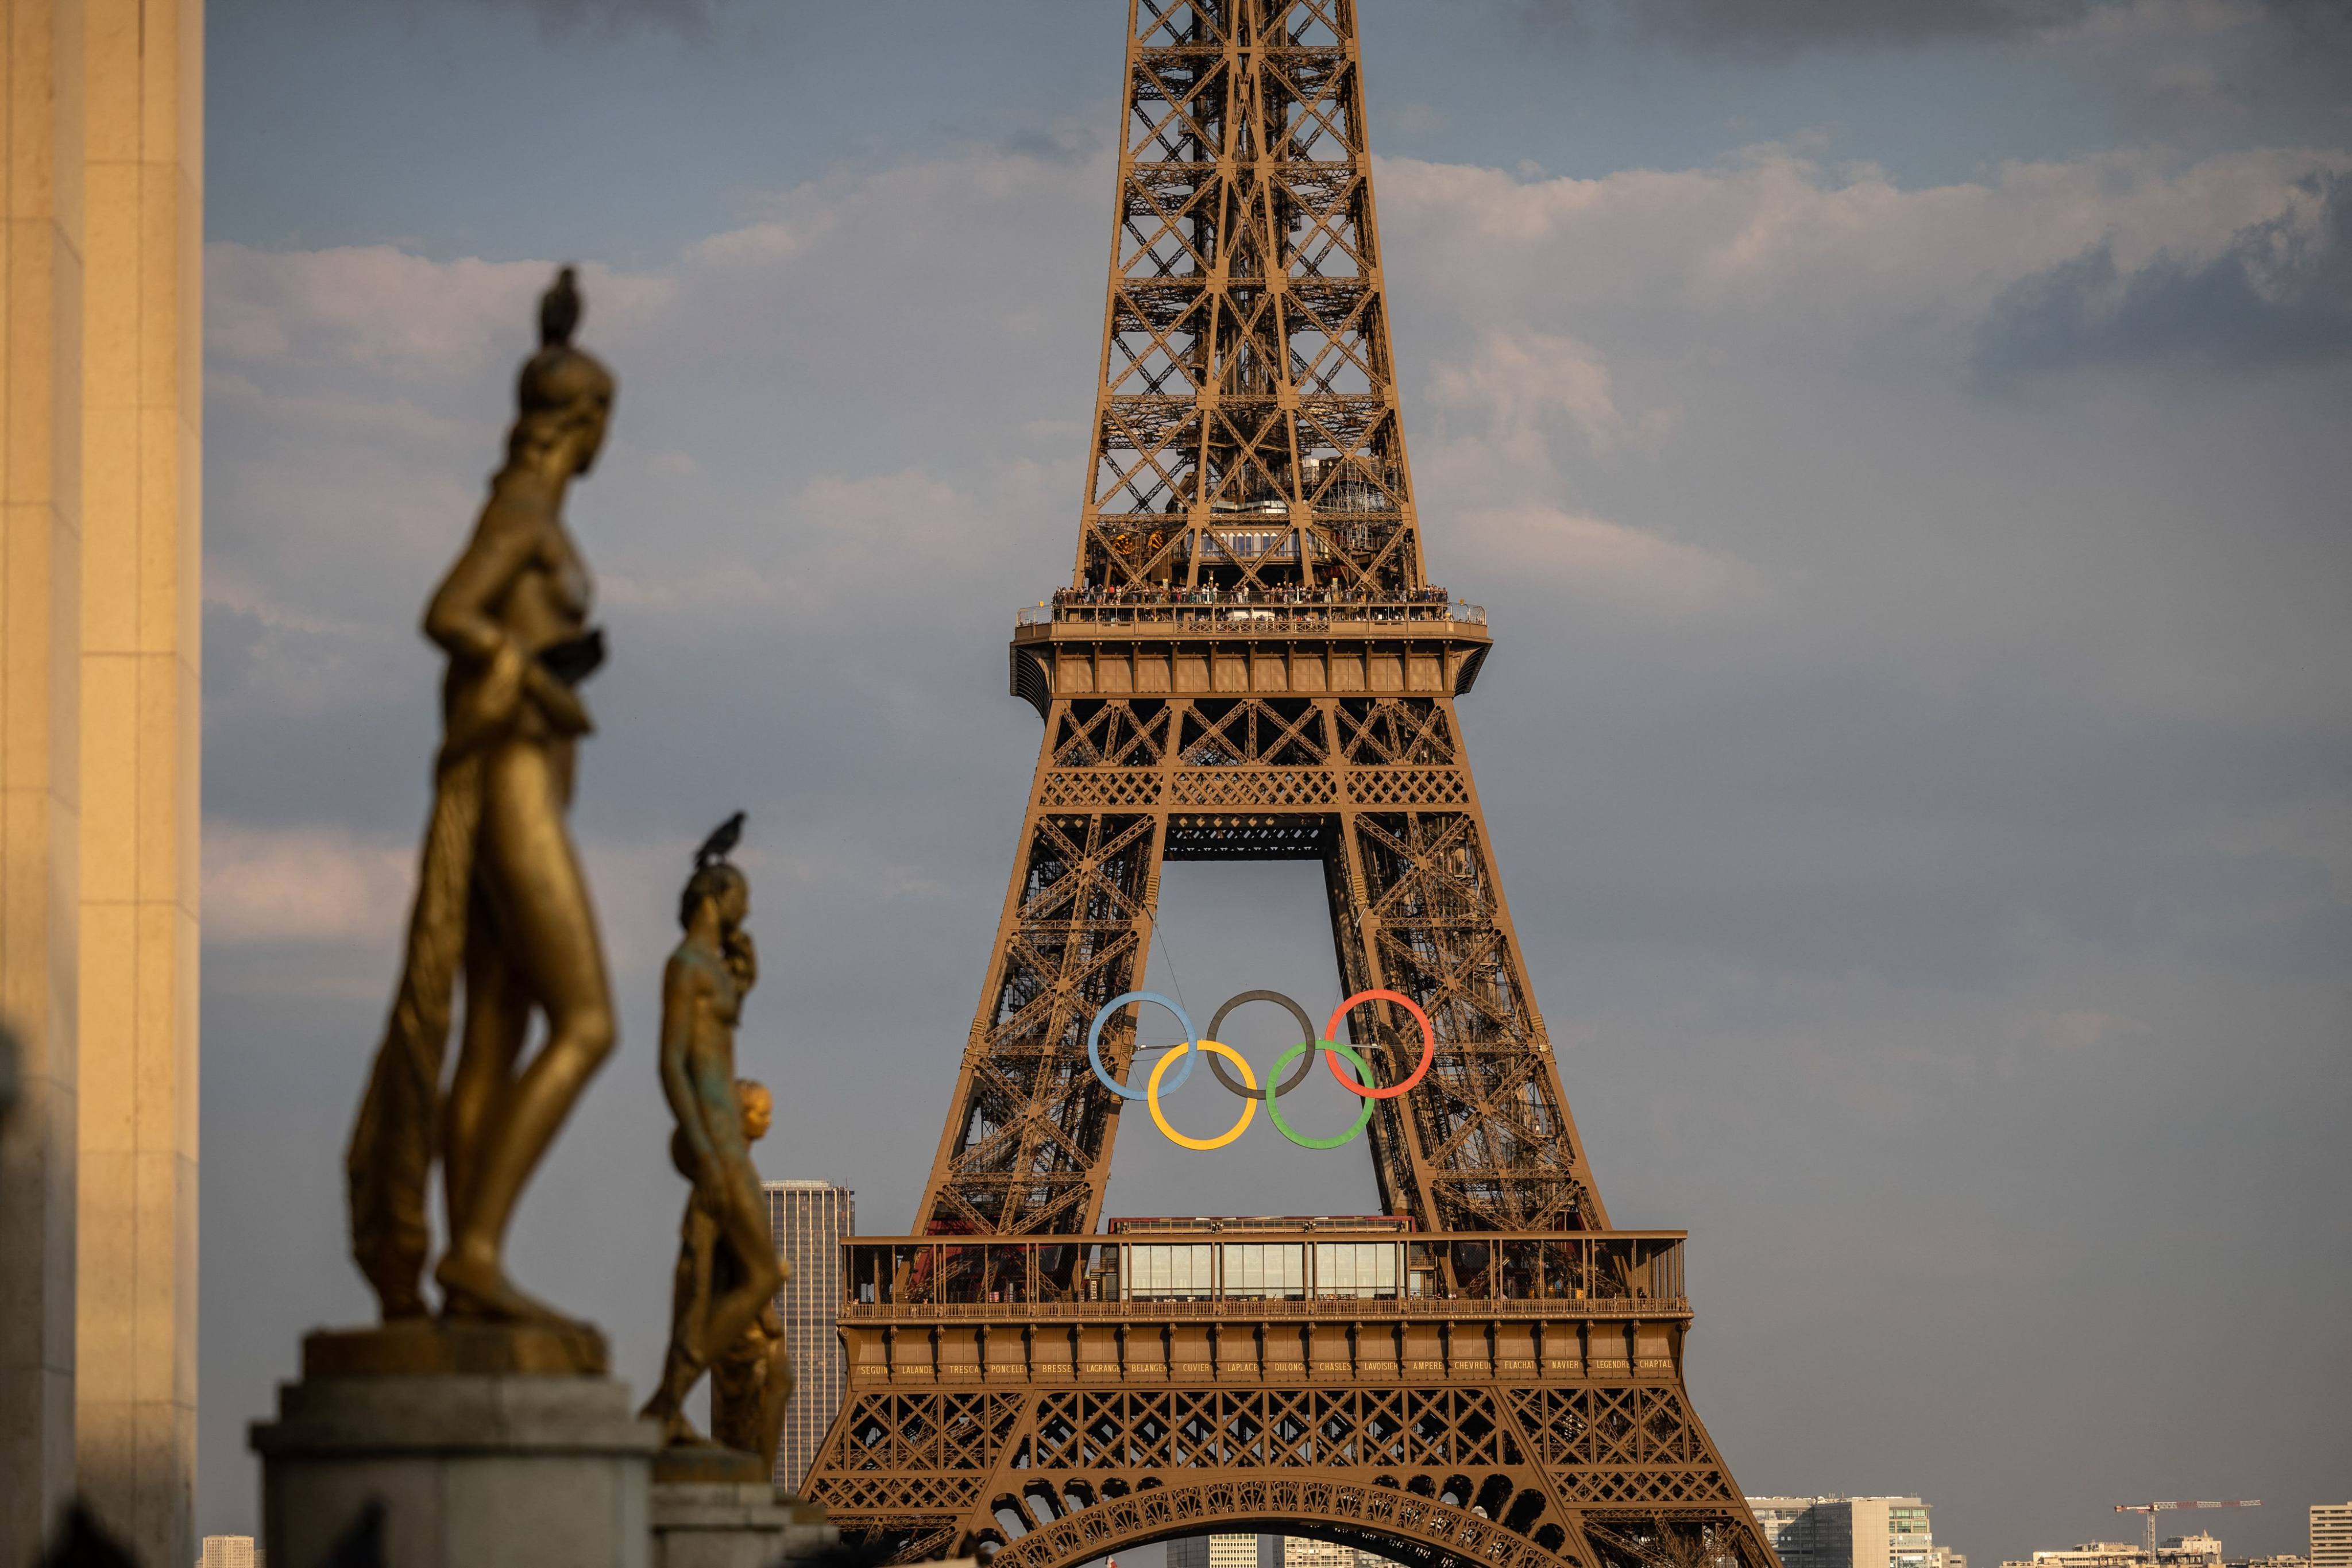 The Eiffel Tower, at the foot of which beach volleyball will take place, is just one of the iconic locations in Paris and elsewhere in France that will host sporting events during the 2024 Olympics. Photo: AFP